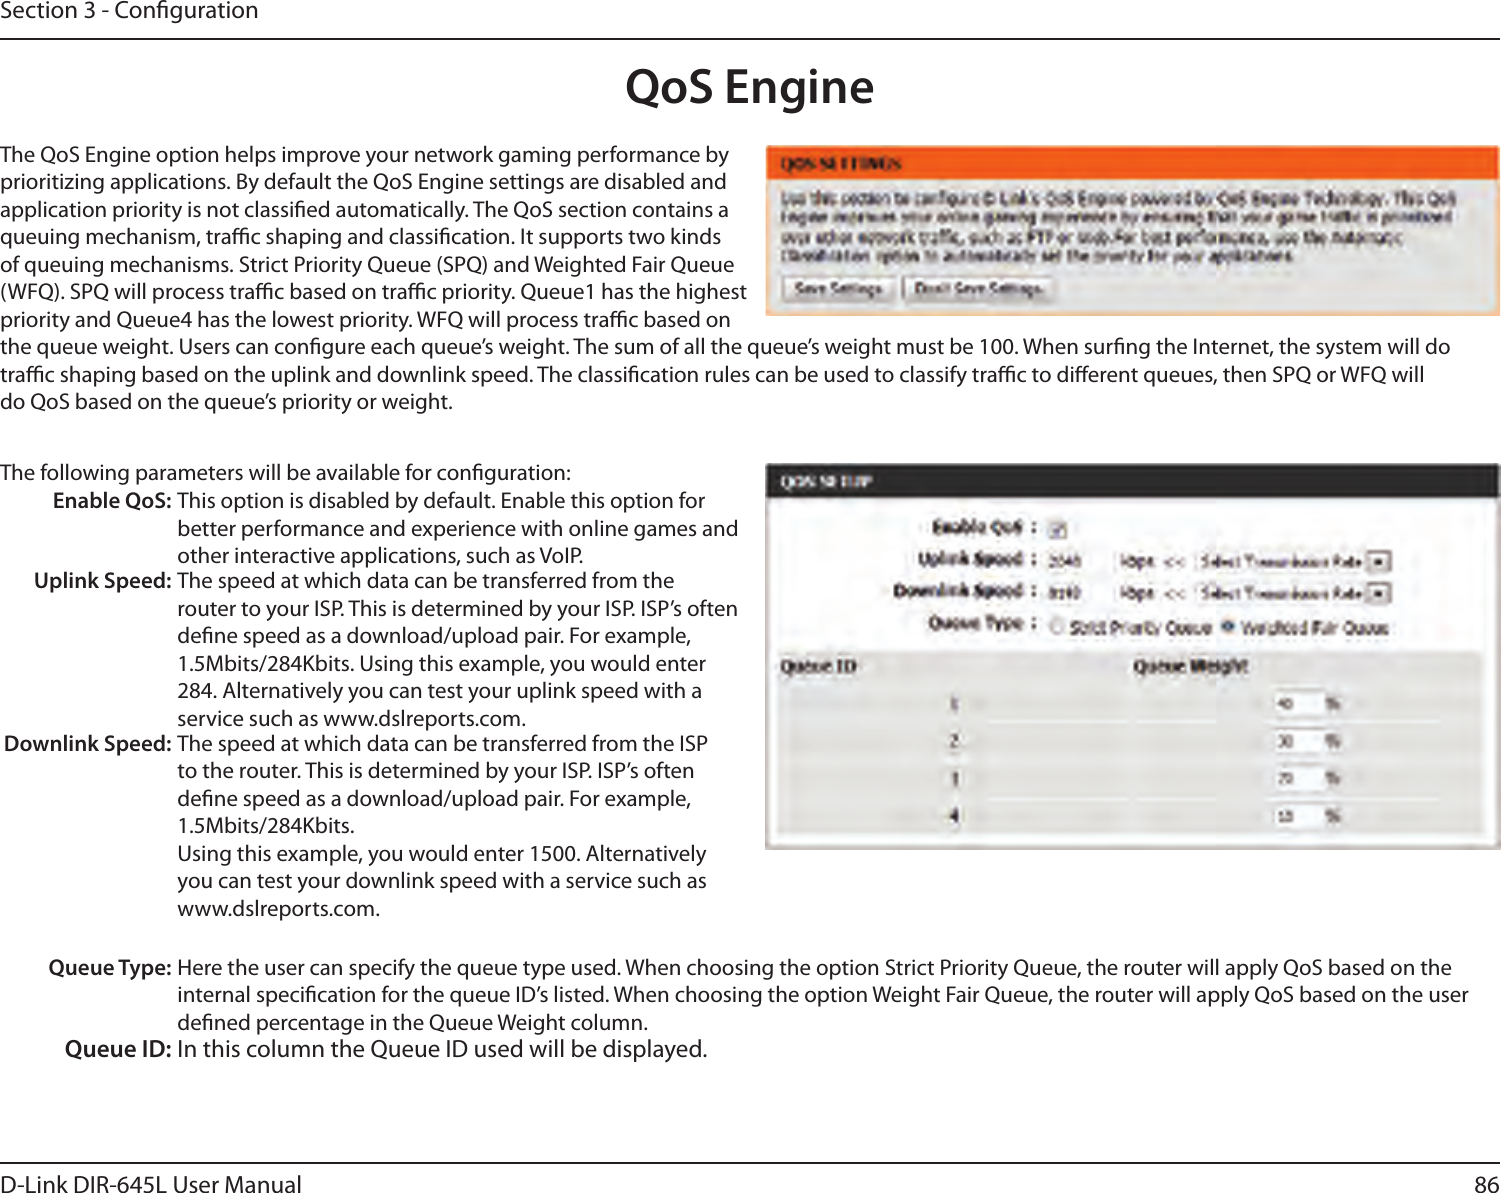 86D-Link DIR-645L User ManualSection 3 - CongurationQoS EngineThe QoS Engine option helps improve your network gaming performance by prioritizing applications. By default the QoS Engine settings are disabled and application priority is not classied automatically. The QoS section contains a queuing mechanism, trac shaping and classication. It supports two kinds of queuing mechanisms. Strict Priority Queue (SPQ) and Weighted Fair Queue (WFQ). SPQ will process trac based on trac priority. Queue1 has the highest priority and Queue4 has the lowest priority. WFQ will process trac based on the queue weight. Users can congure each queue’s weight. The sum of all the queue’s weight must be 100. When surng the Internet, the system will do trac shaping based on the uplink and downlink speed. The classication rules can be used to classify trac to dierent queues, then SPQ or WFQ will do QoS based on the queue’s priority or weight.The following parameters will be available for conguration:Enable QoS: This option is disabled by default. Enable this option for better performance and experience with online games and other interactive applications, such as VoIP.Uplink Speed: The speed at which data can be transferred from the router to your ISP. This is determined by your ISP. ISP’s often dene speed as a download/upload pair. For example, 1.5Mbits/284Kbits. Using this example, you would enter 284. Alternatively you can test your uplink speed with a service such as www.dslreports.com.Downlink Speed: The speed at which data can be transferred from the ISP to the router. This is determined by your ISP. ISP’s often dene speed as a download/upload pair. For example, 1.5Mbits/284Kbits. Using this example, you would enter 1500. Alternatively you can test your downlink speed with a service such as www.dslreports.com.Queue Type: Here the user can specify the queue type used. When choosing the option Strict Priority Queue, the router will apply QoS based on the internal specication for the queue ID’s listed. When choosing the option Weight Fair Queue, the router will apply QoS based on the user dened percentage in the Queue Weight column.Queue ID: In this column the Queue ID used will be displayed.